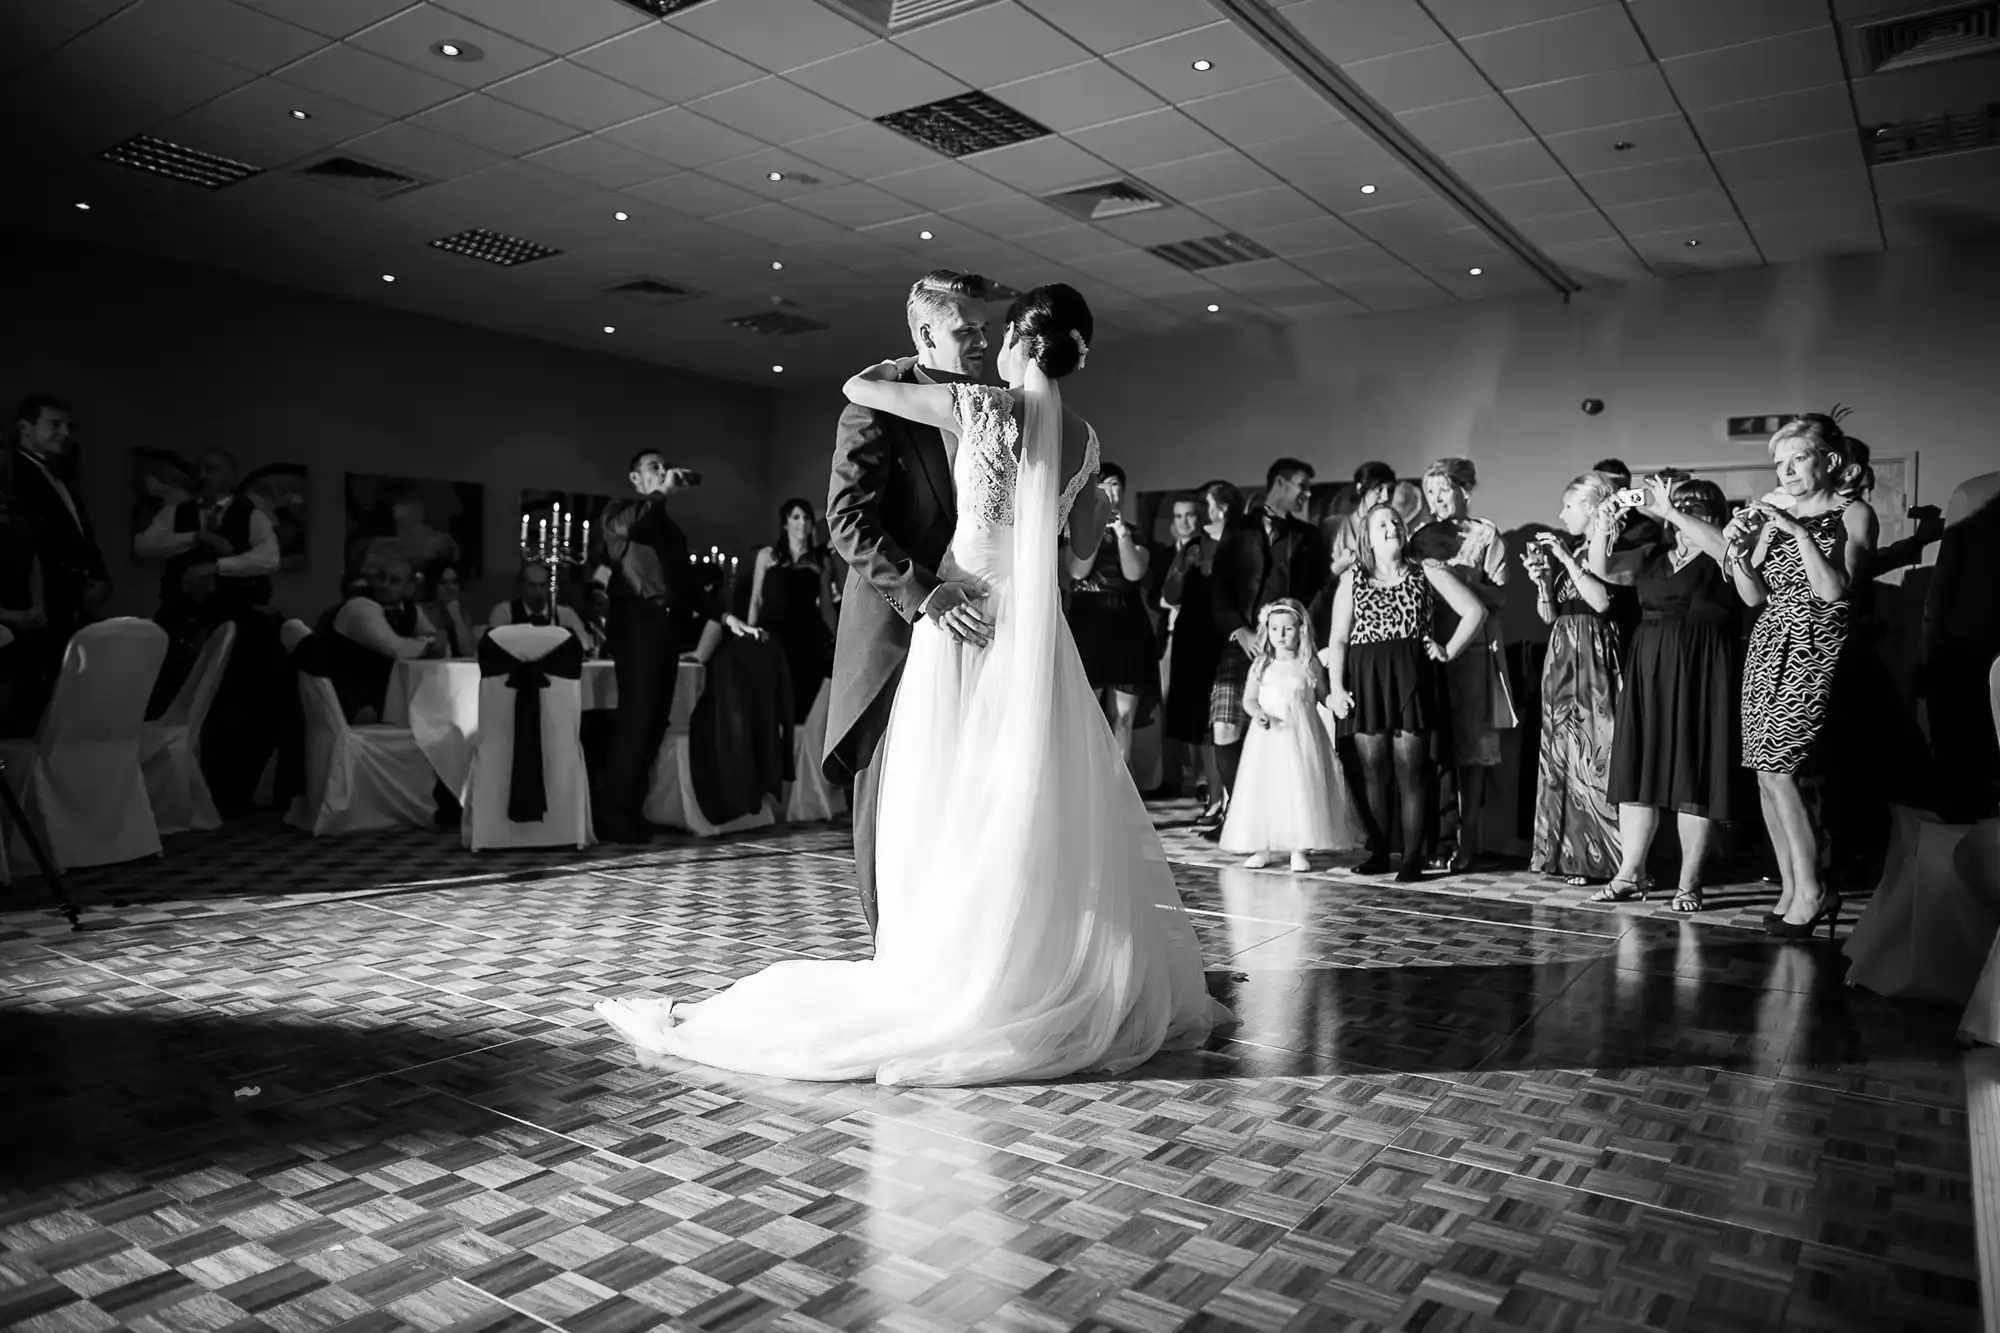 A bride and groom share a kiss on the dance floor as wedding guests look on and applaud in a warmly lit room.